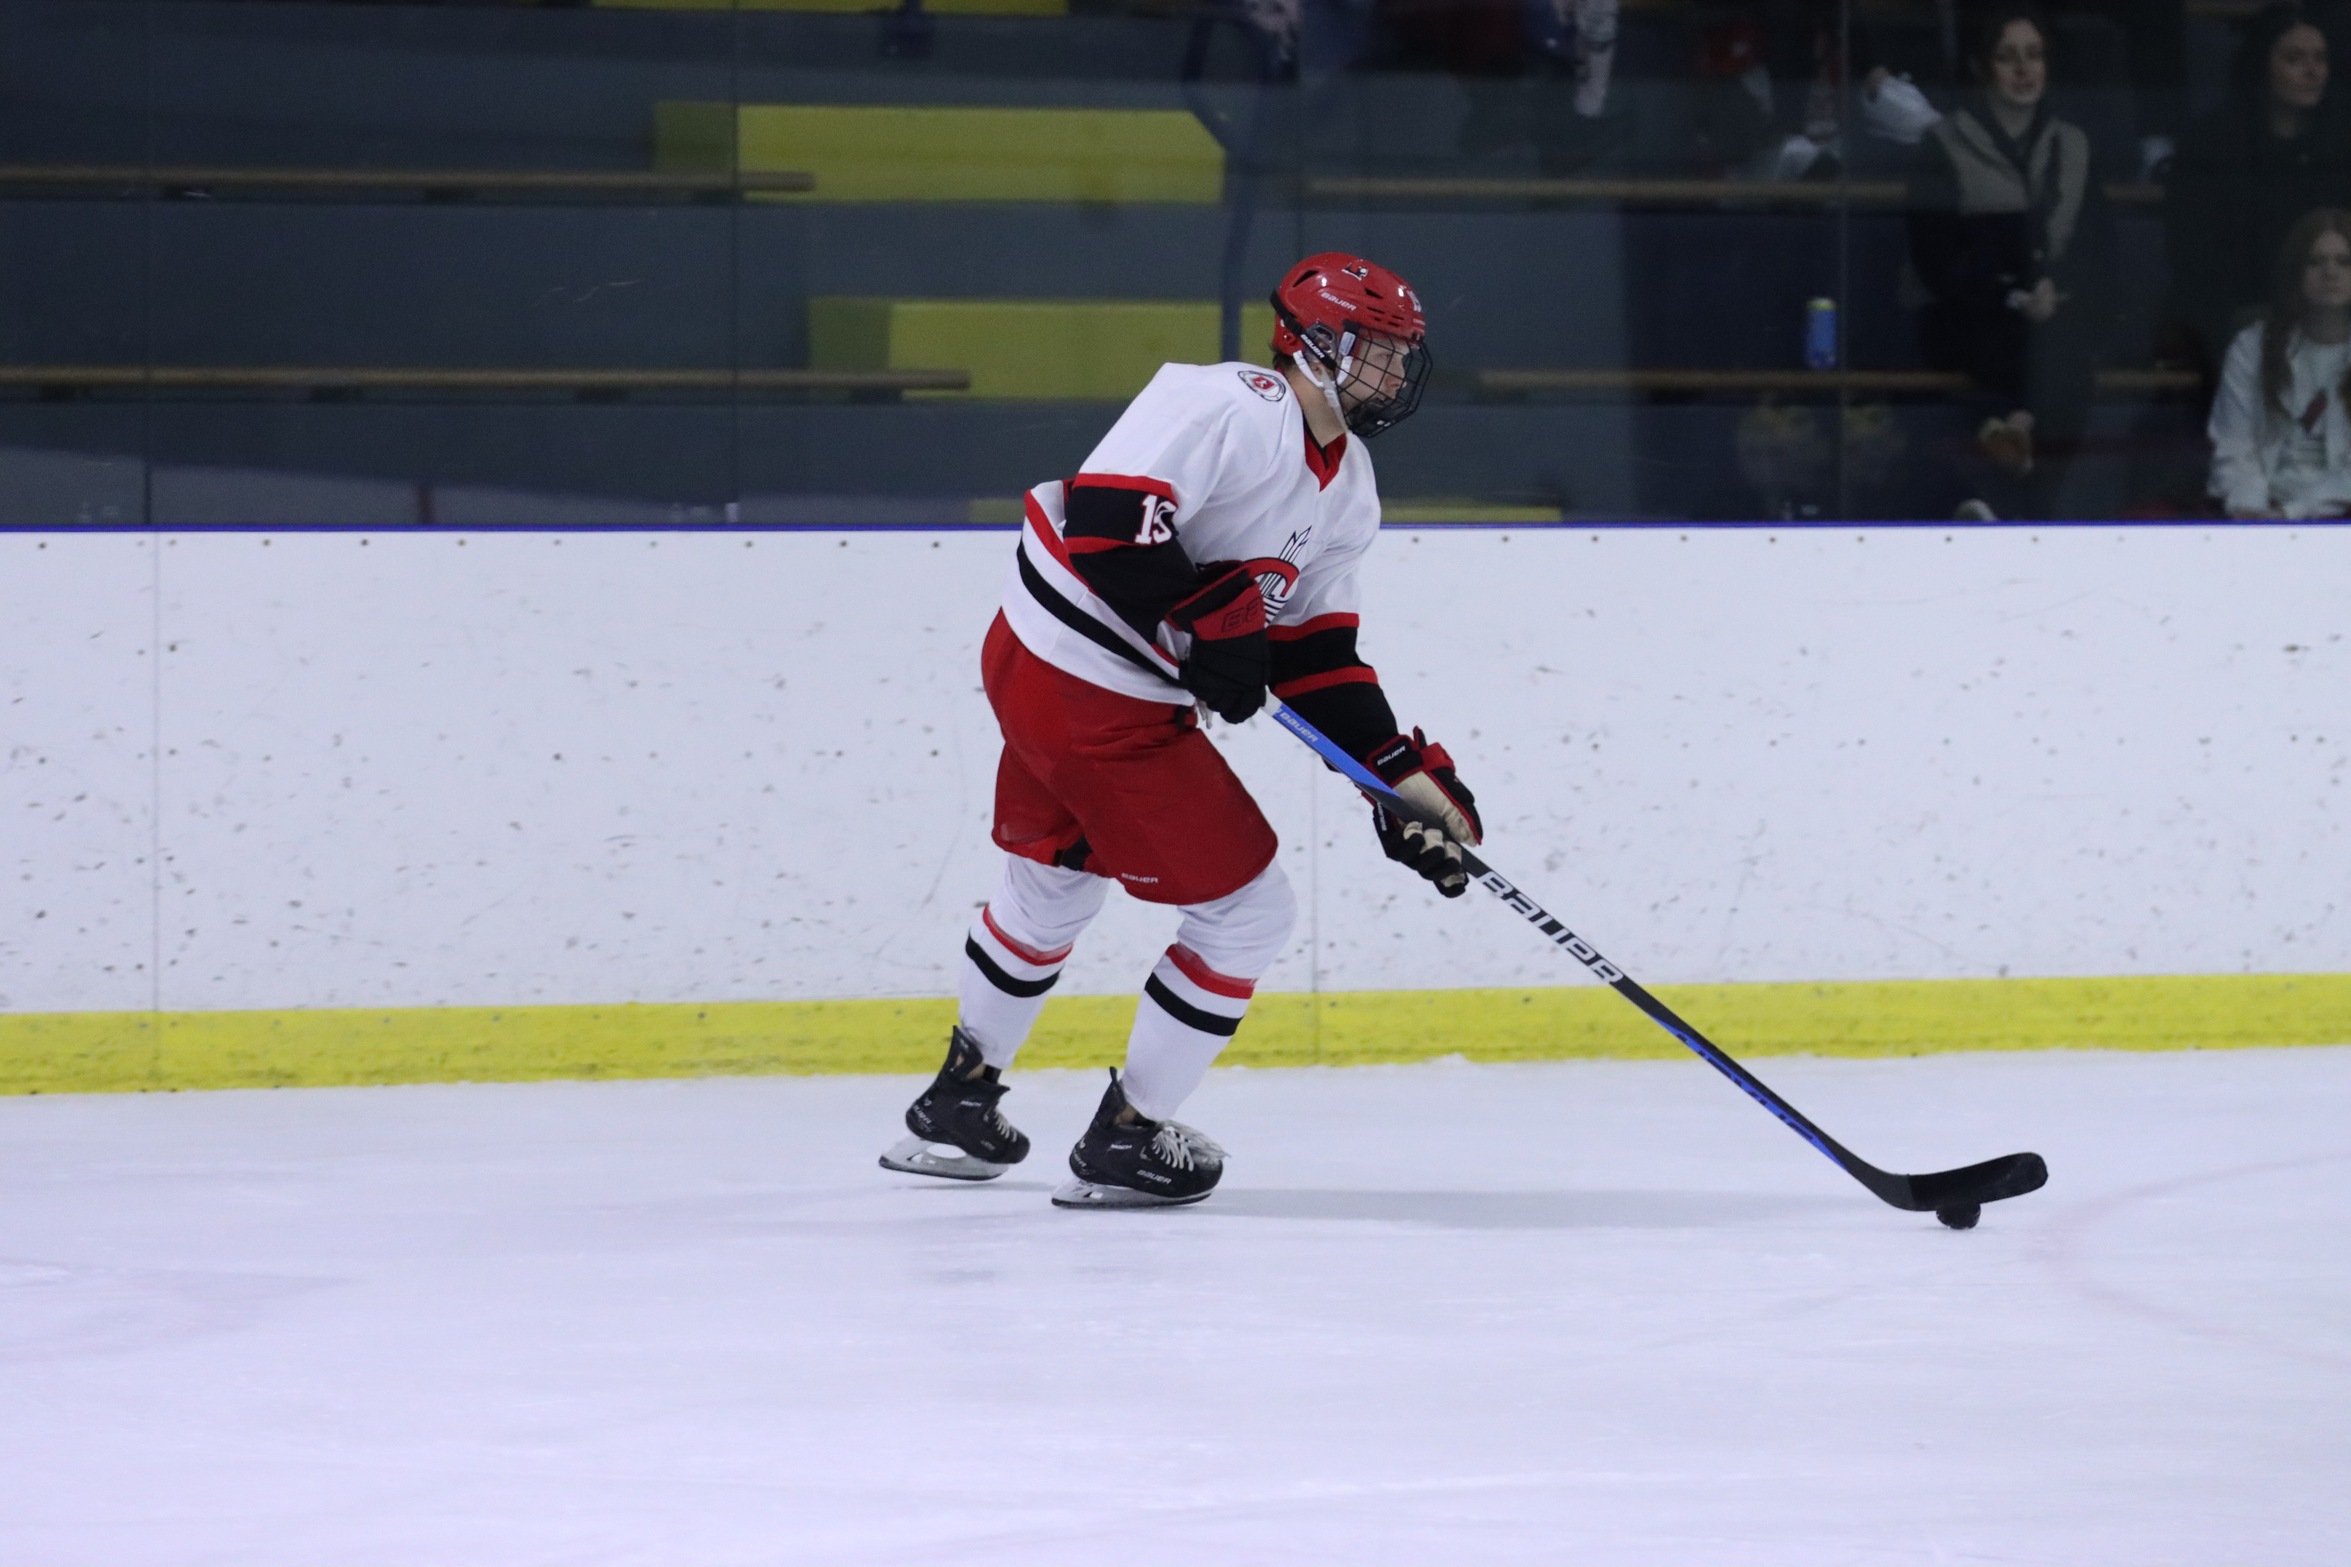 Men's Hockey defeated in shootout by Lawrence Tech